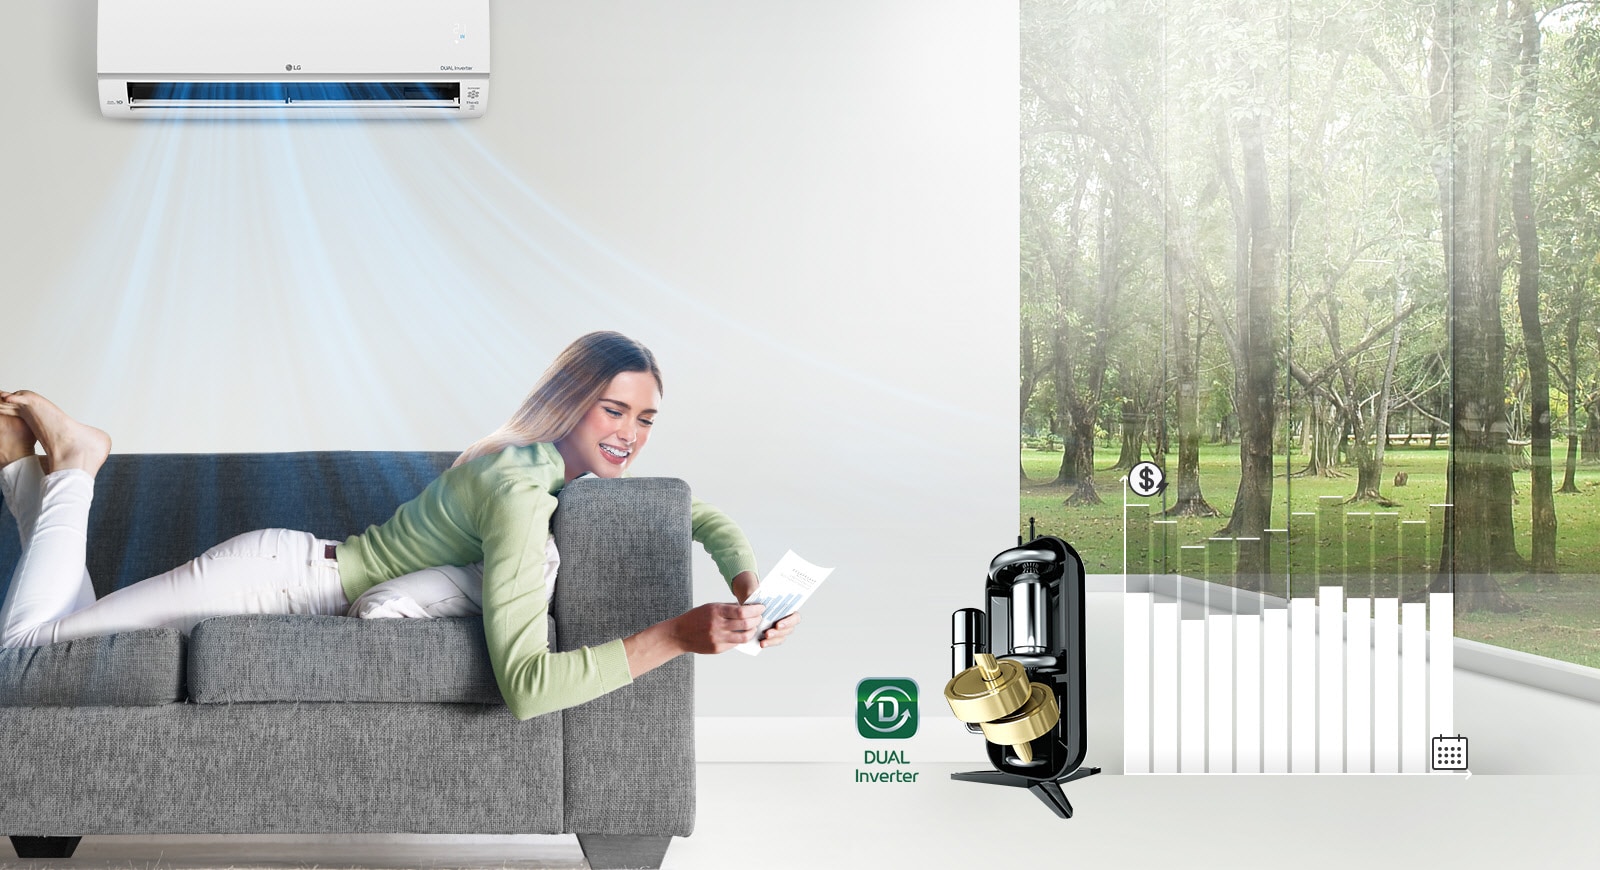 A woman lounges on a sofa smiling as the air conditioner blows air above her. To the right of the woman is the Dual Inverter logo and an image of the Dual Dual Inverter. Further to the right is a bar graph. The bars go up indicating more money spent and then go down to show that the dual inverter saves customers money.